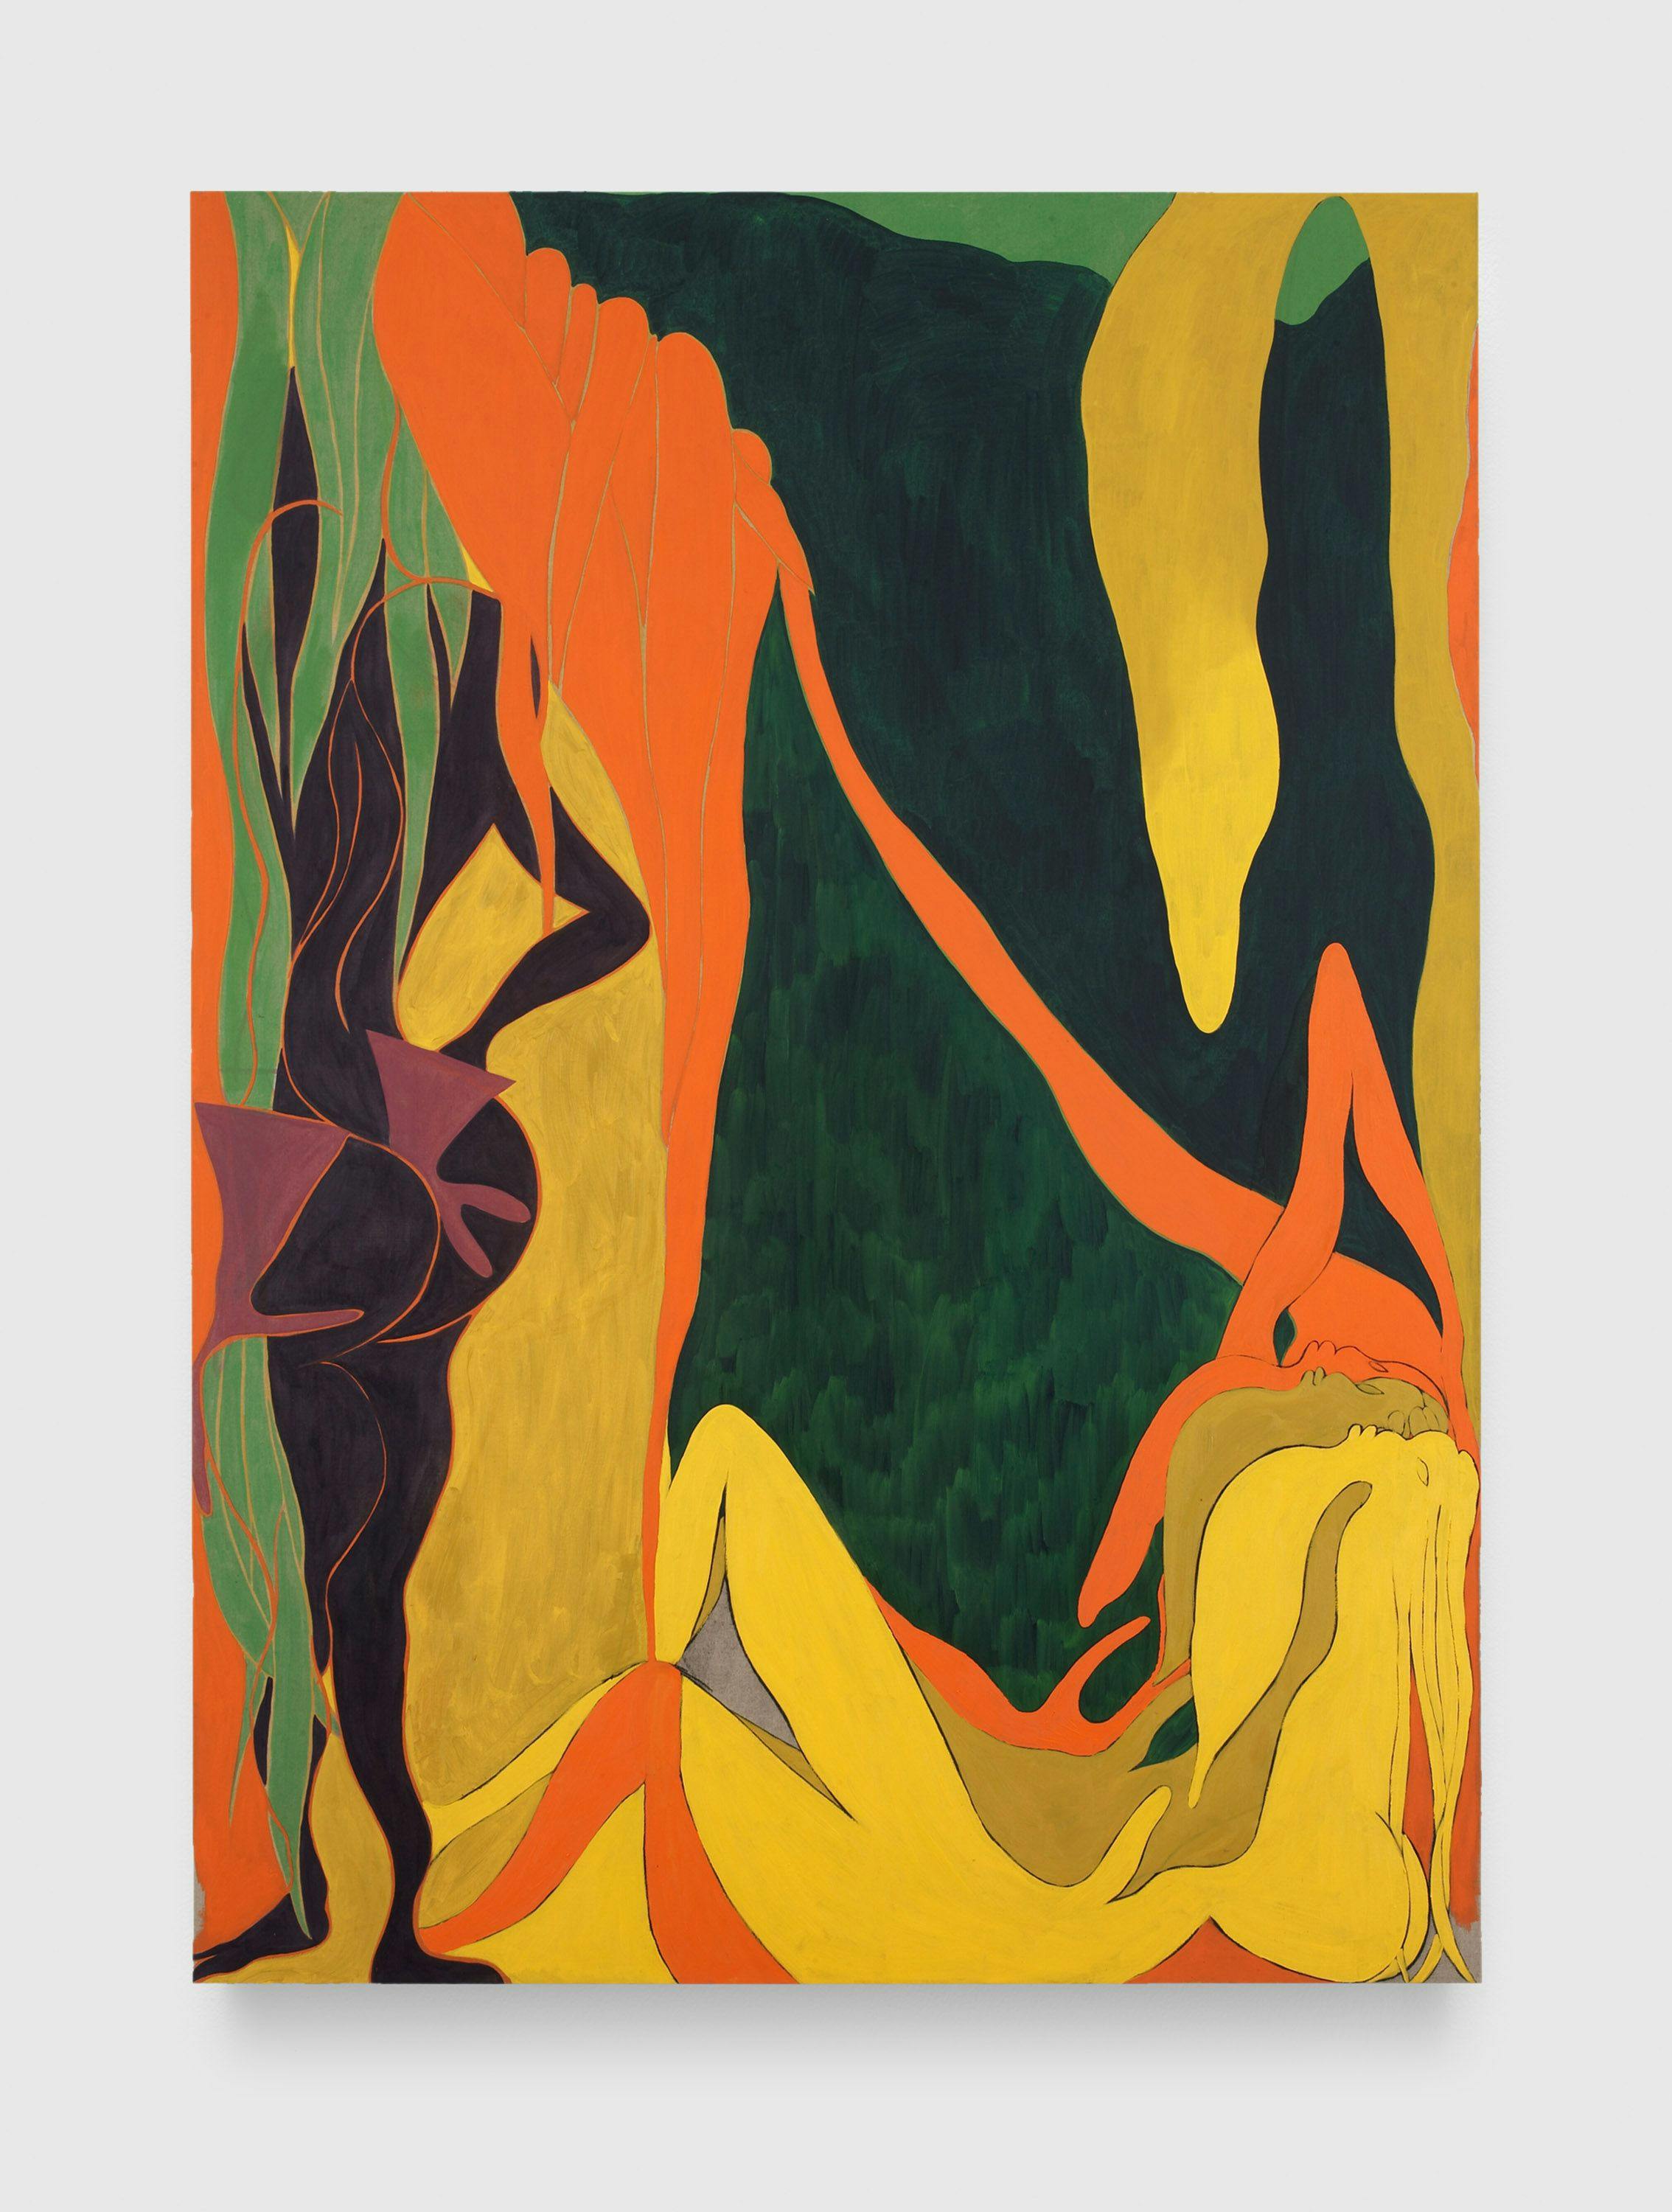 A painting by Chris Ofili, titled The Raising of Lazarus, dated 2007.